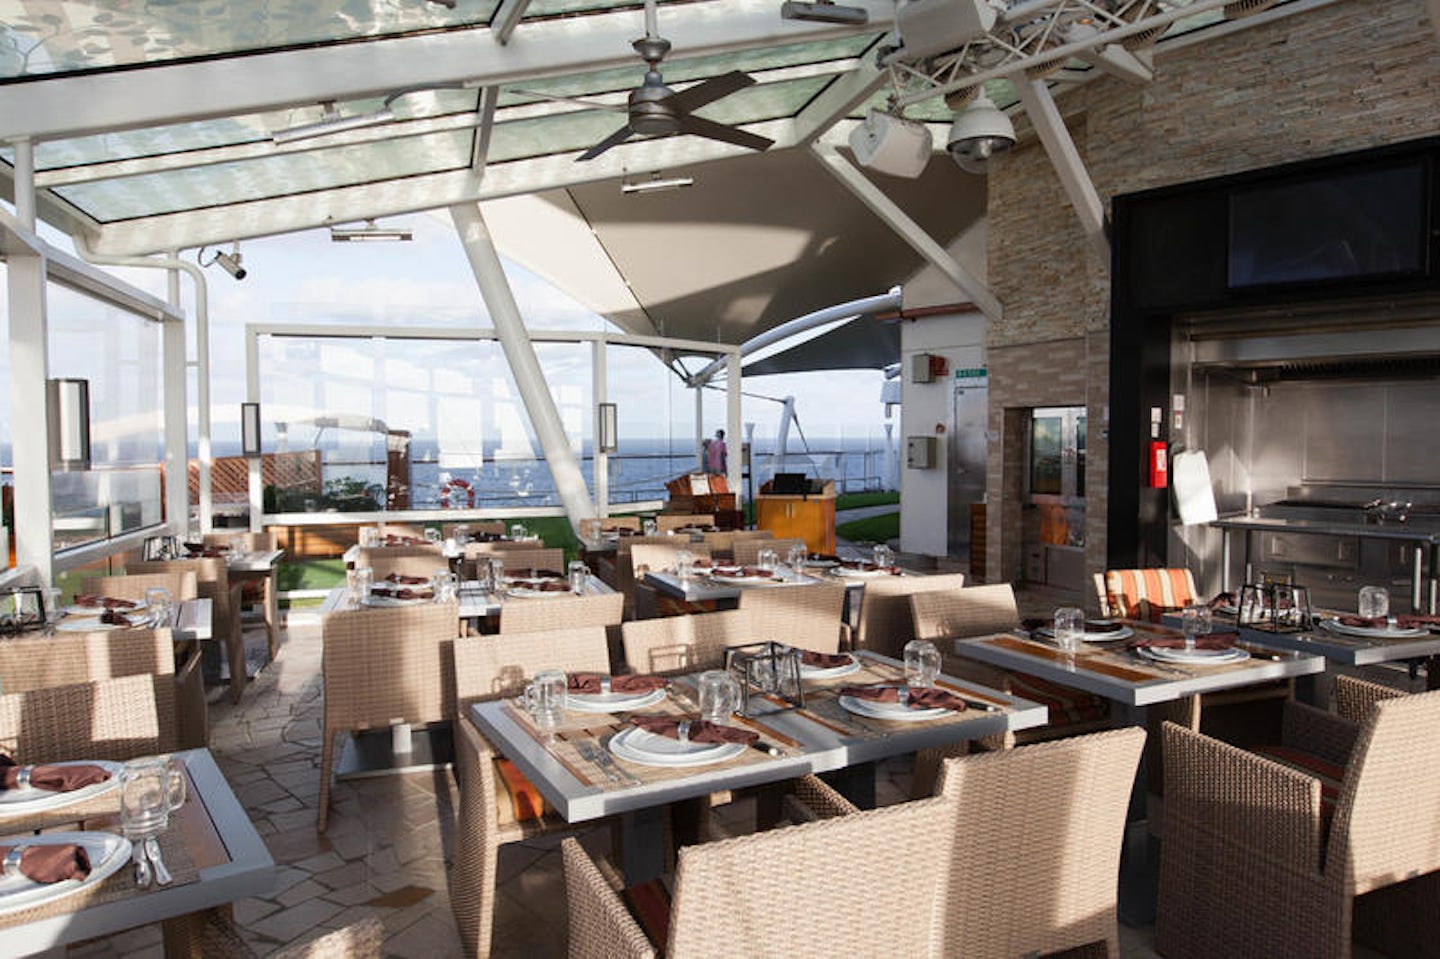 The Lawn Club and Grill on Celebrity Silhouette